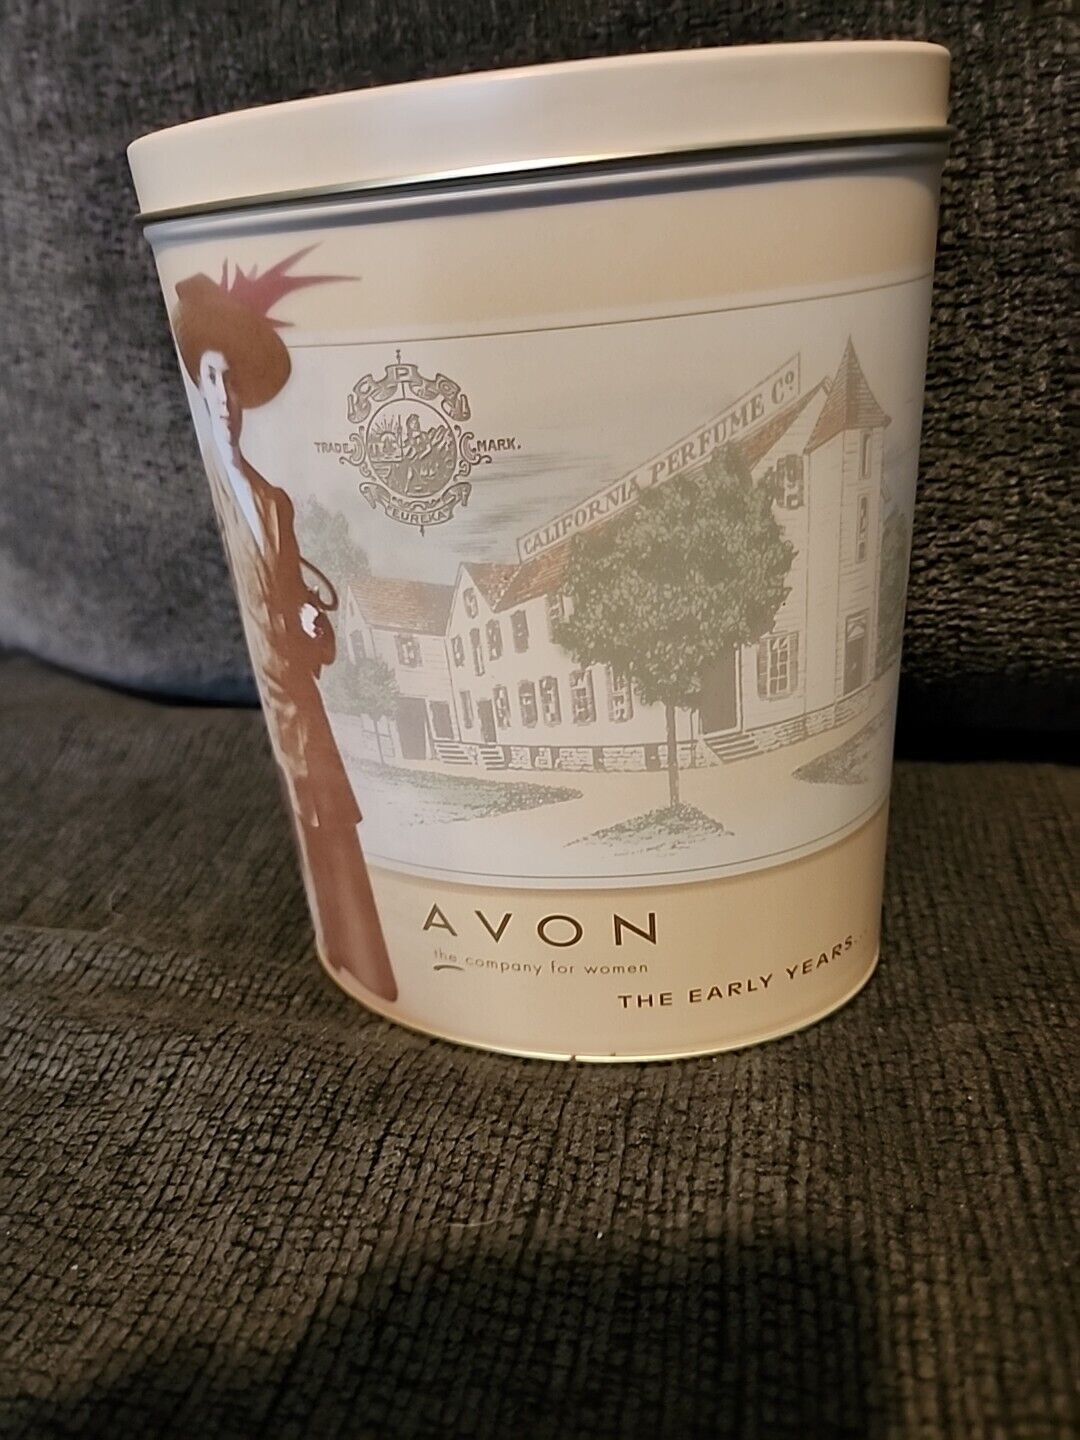 Avon Collectible Tin: Avon - The Early Years [history] Commemorative Tin 